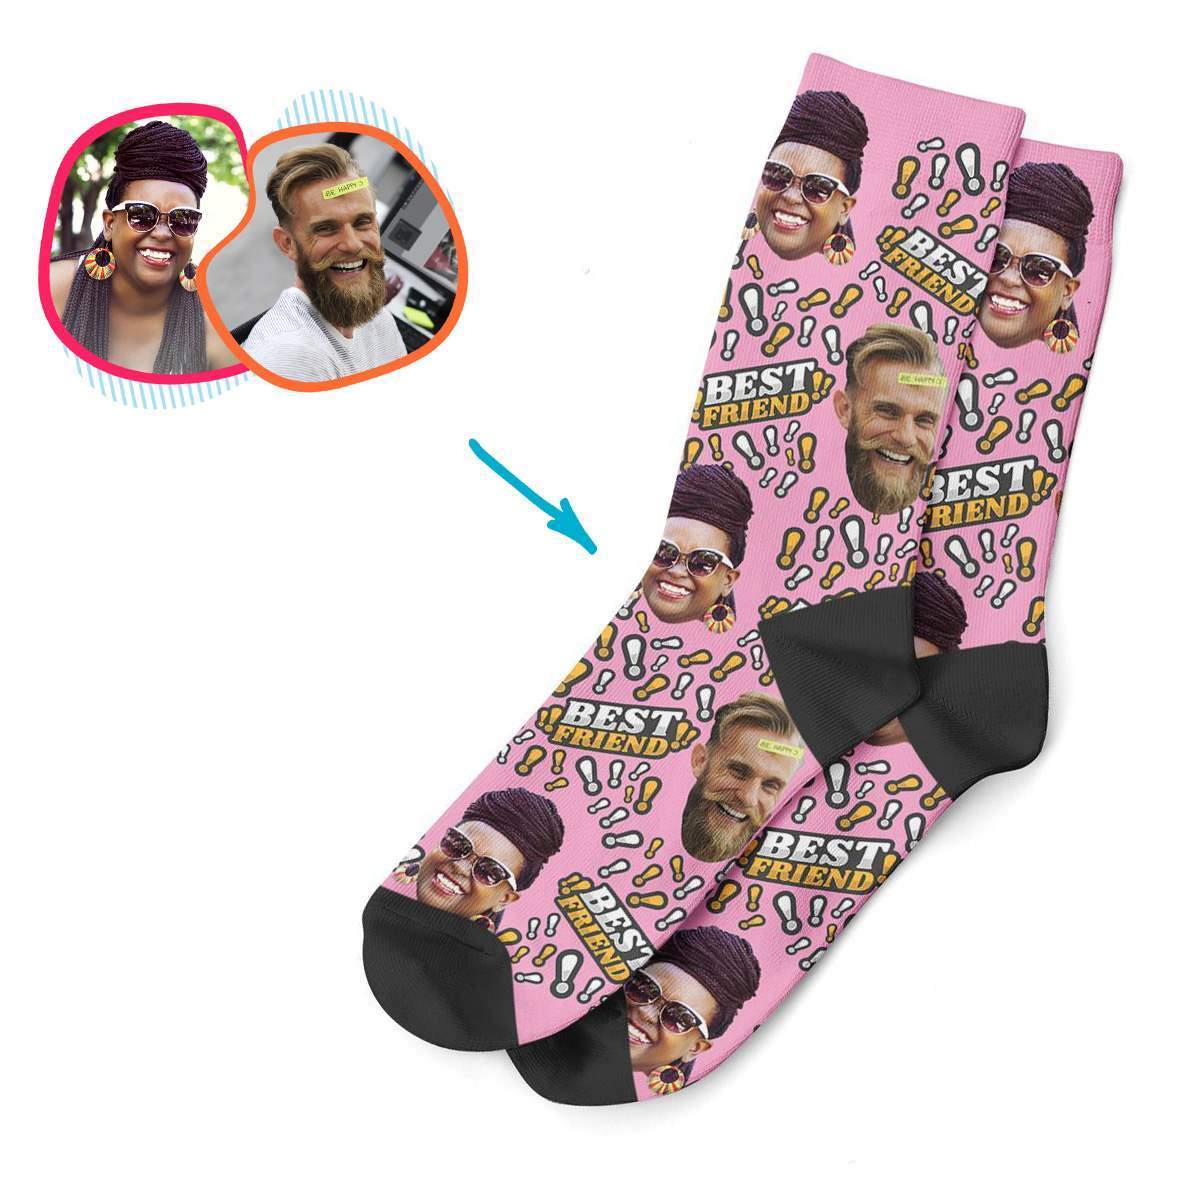 pink Best Friend socks personalized with photo of face printed on them